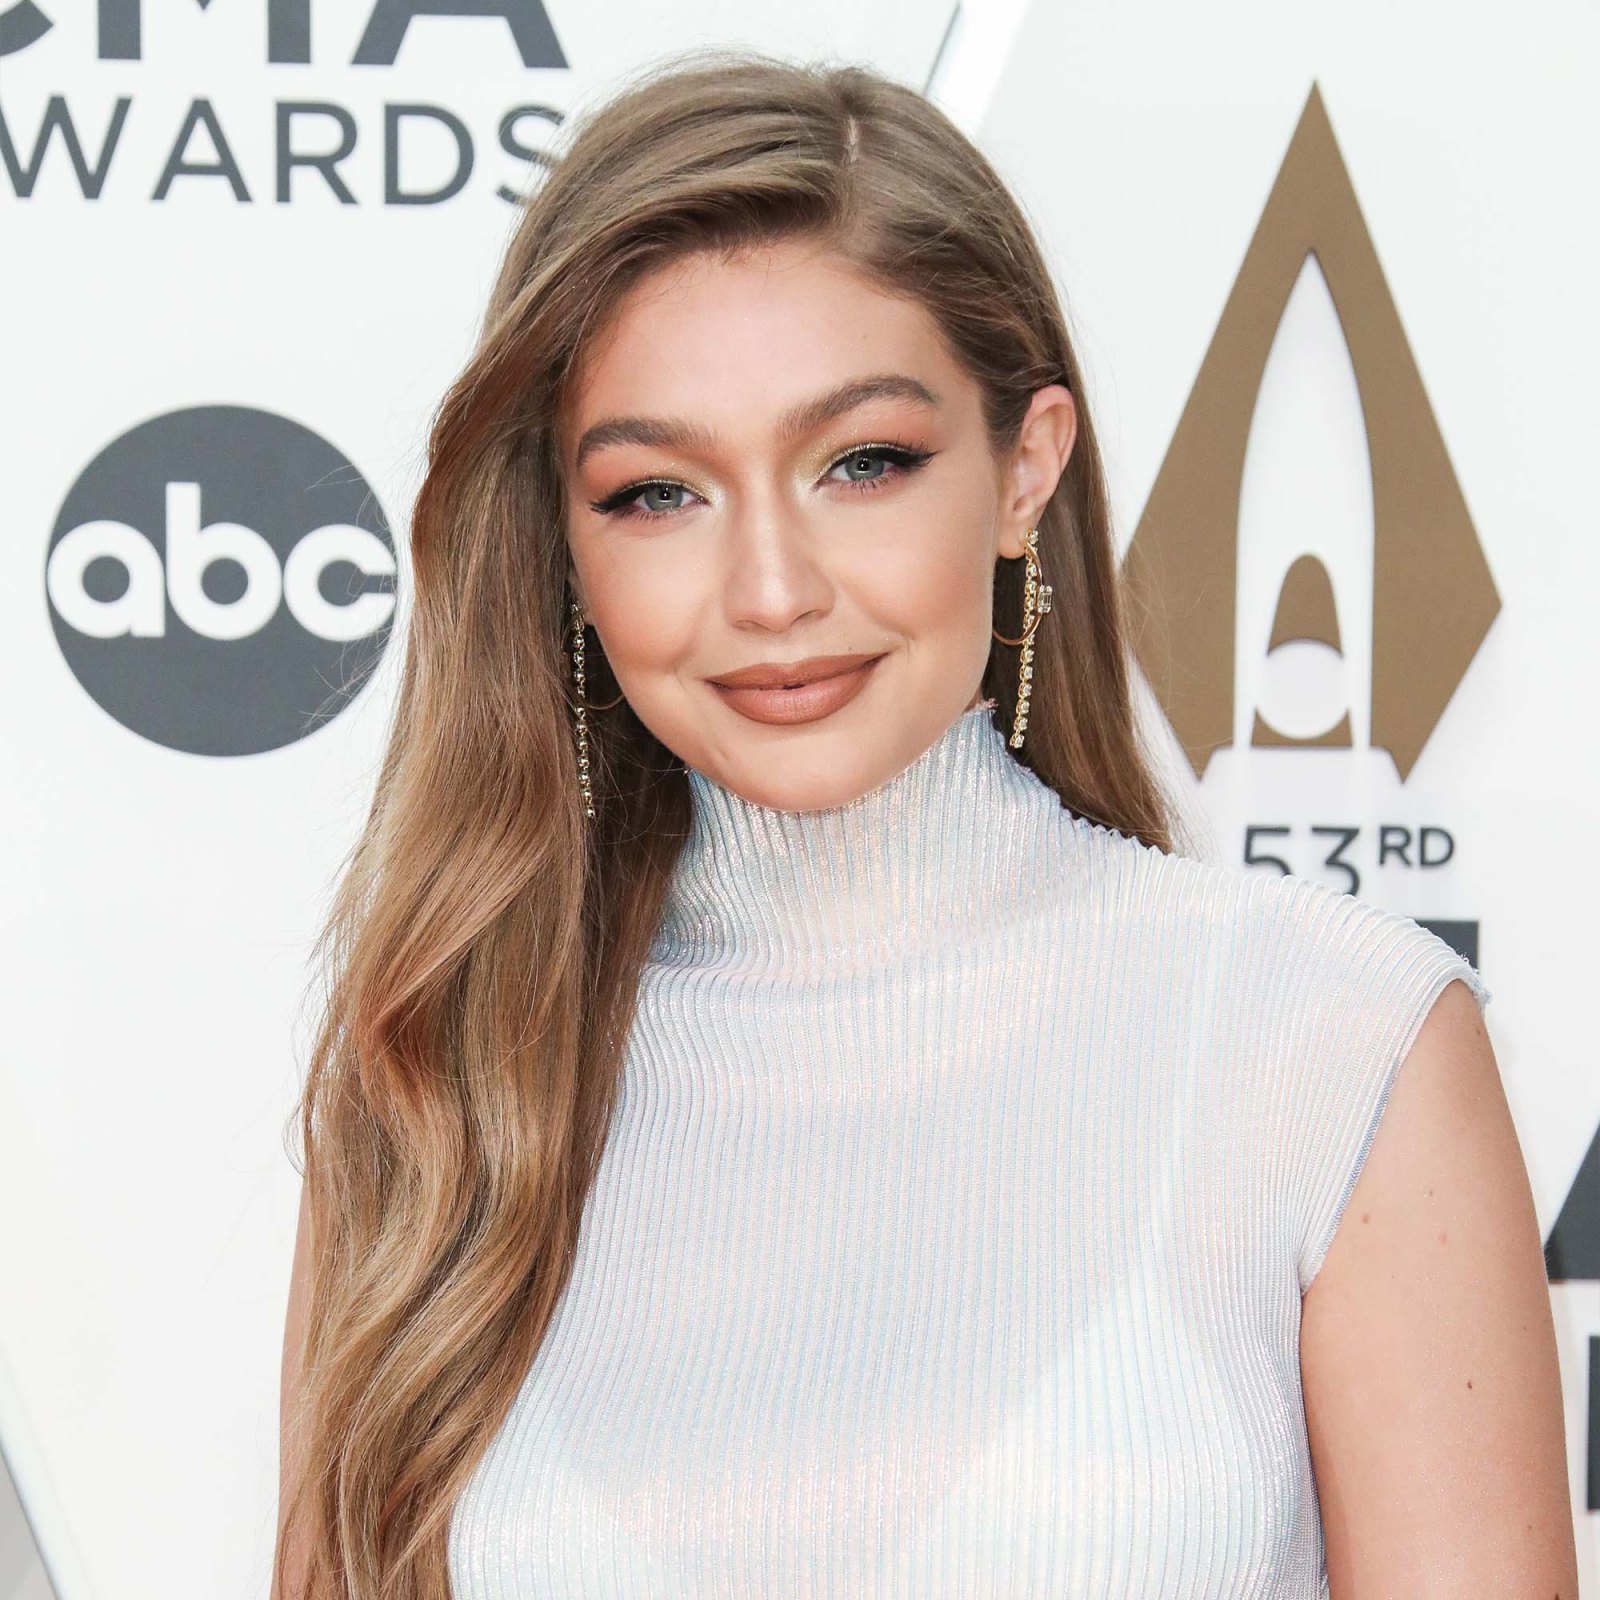 Gigi Hadid Is Completely Self-Made, According to Her Dad